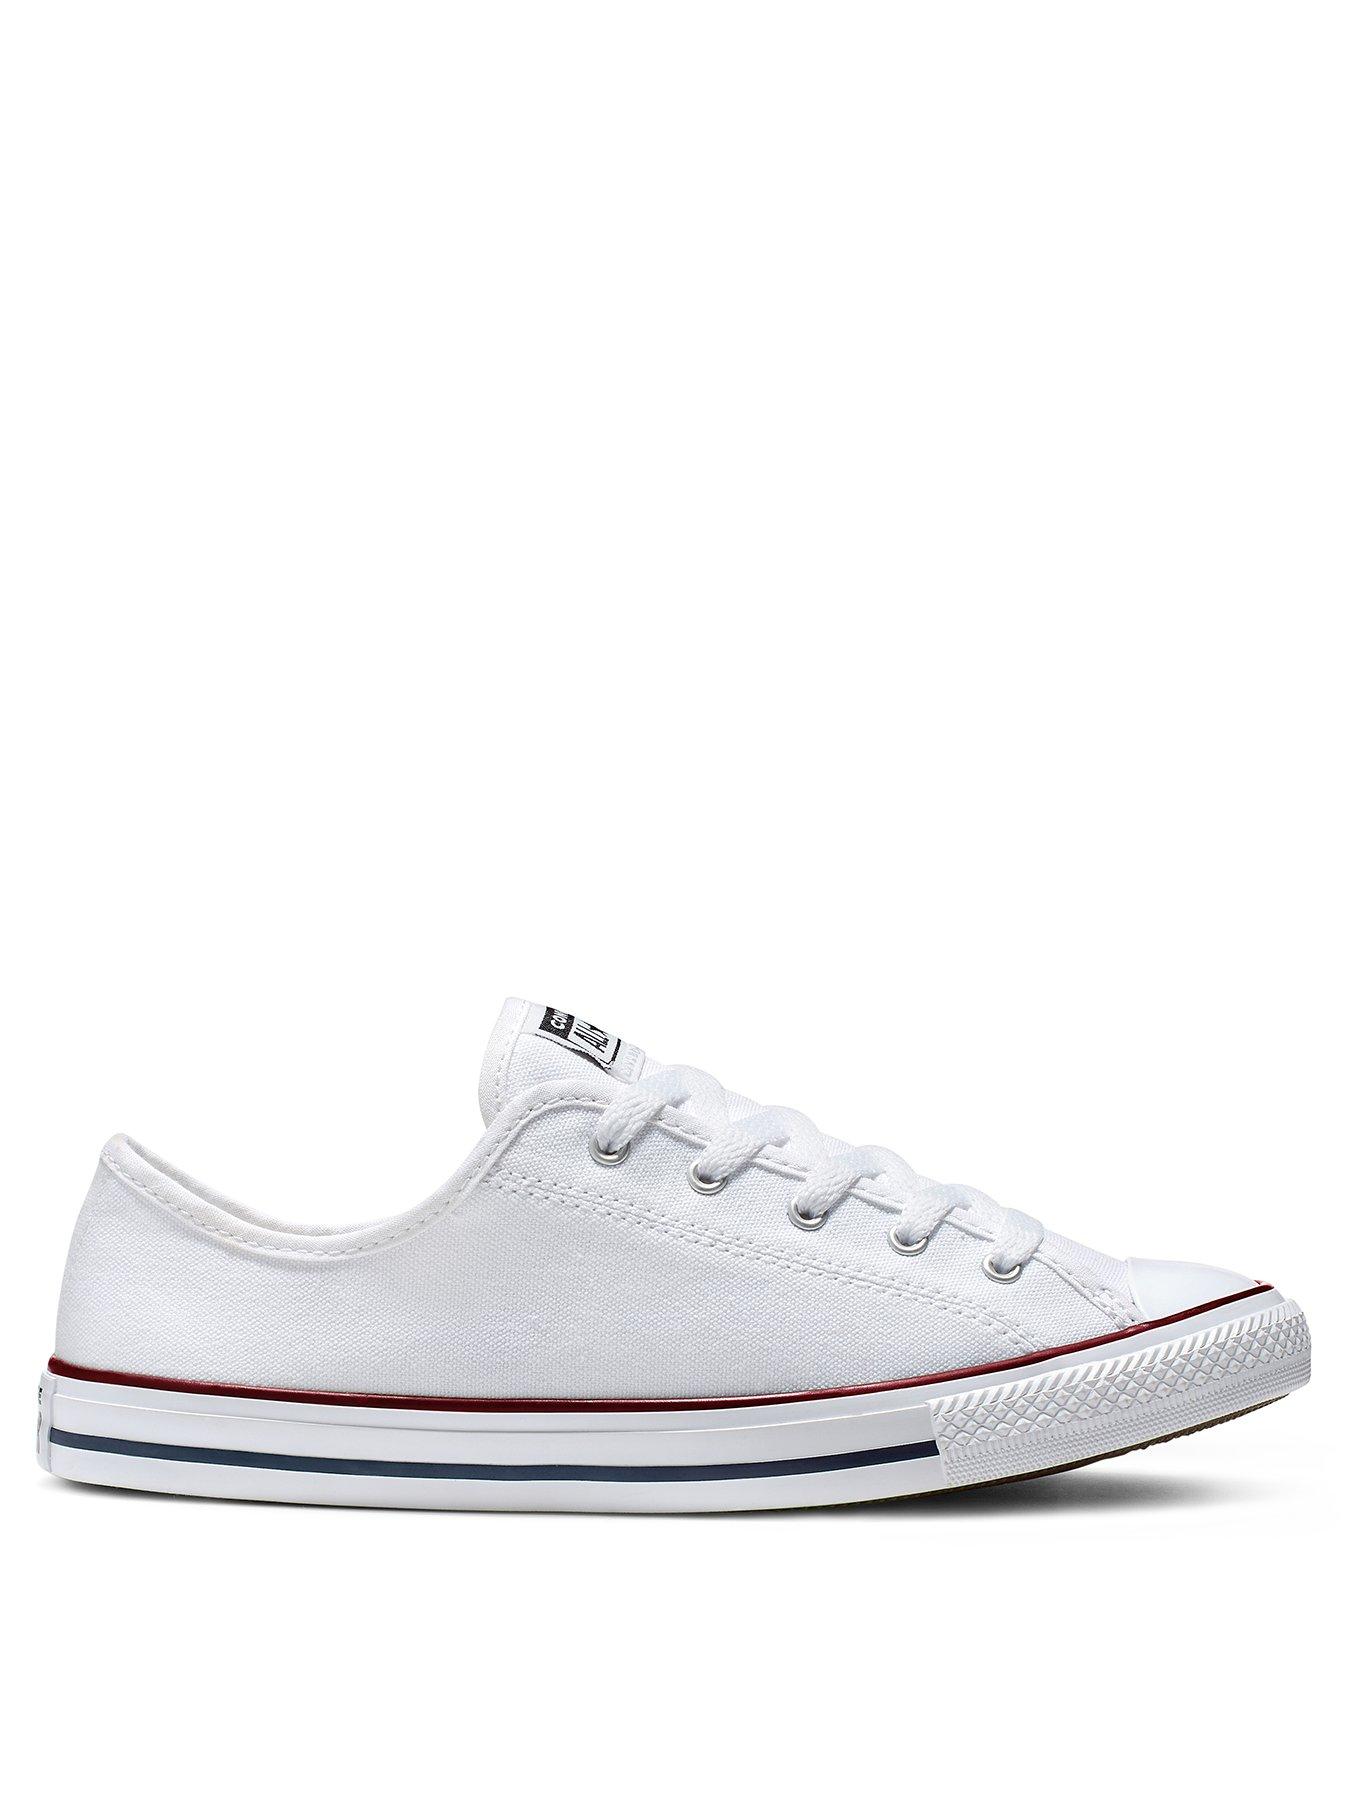 Converse Chuck Taylor All Star Dainty Canvas Ox Plimsolls - White |  very.co.uk